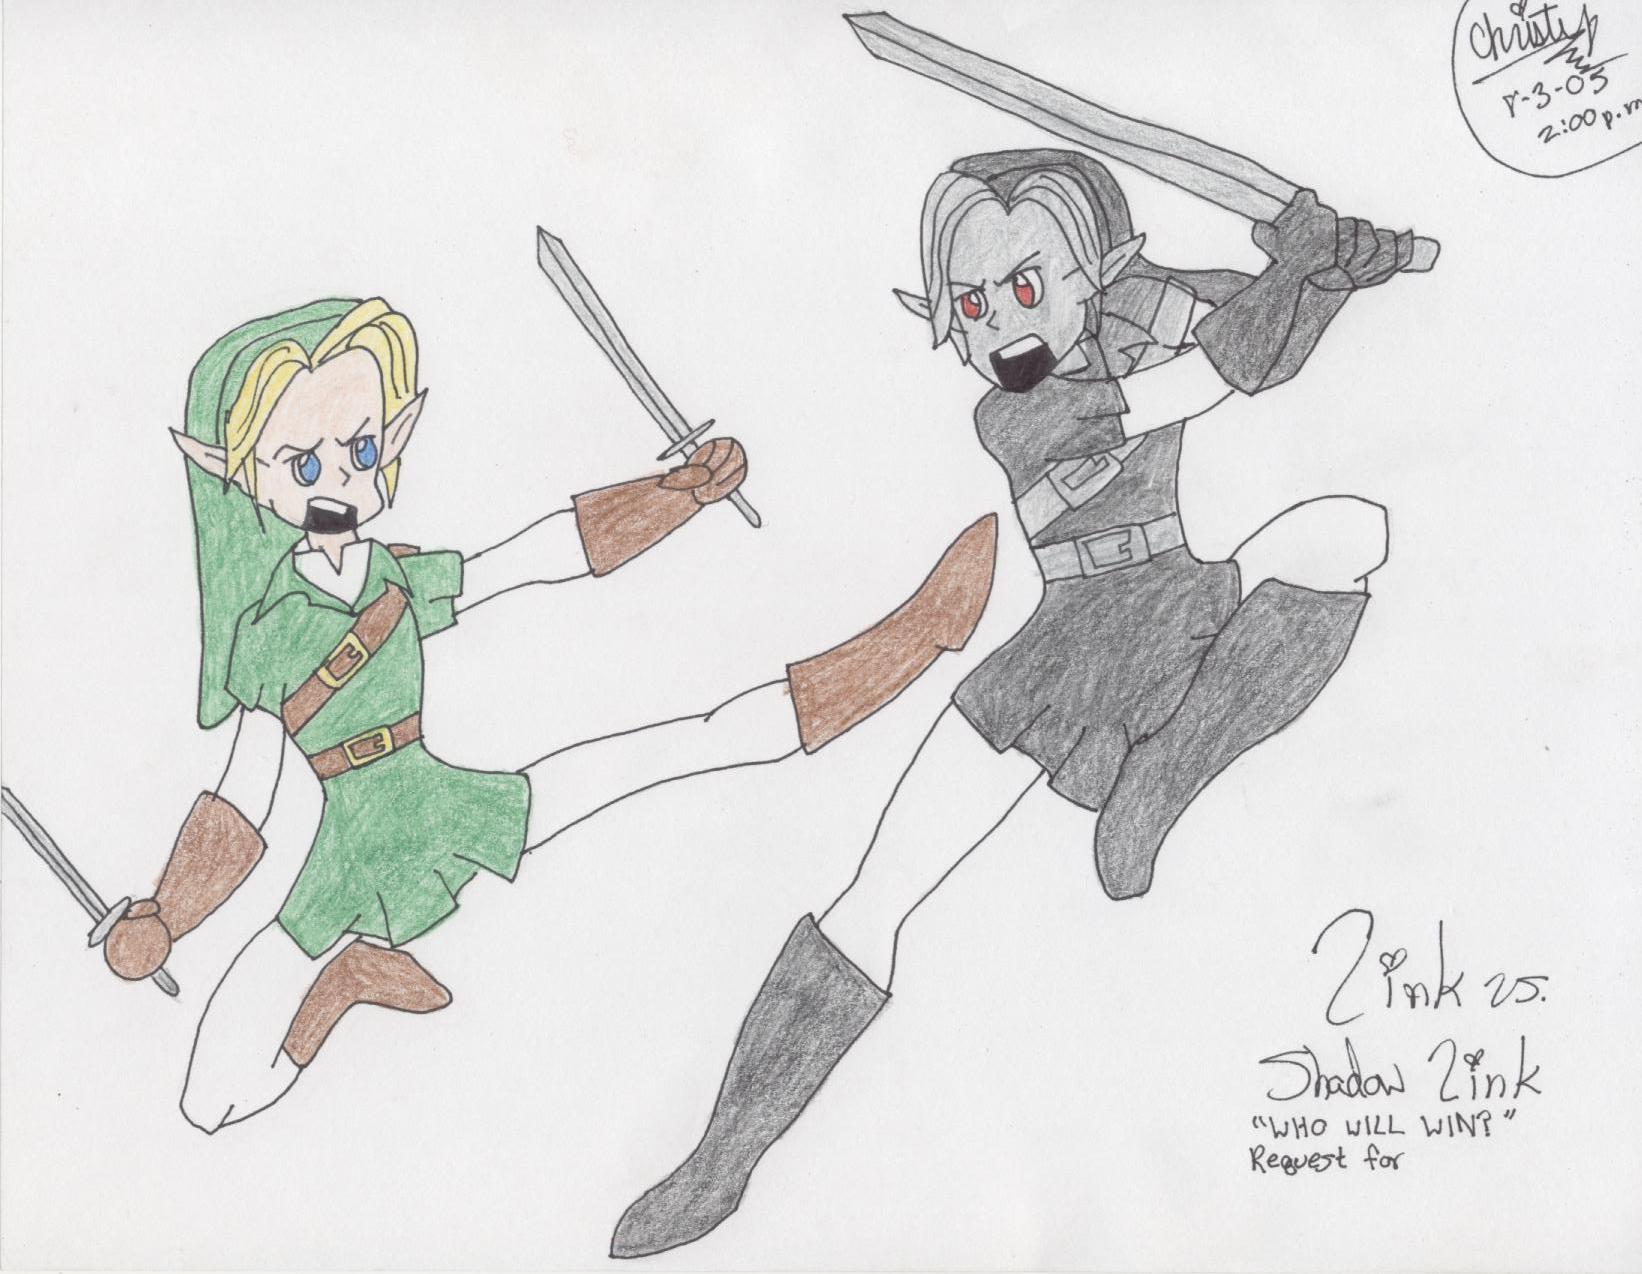 Link vs. Shadow Link (request) by Shiv_Freak